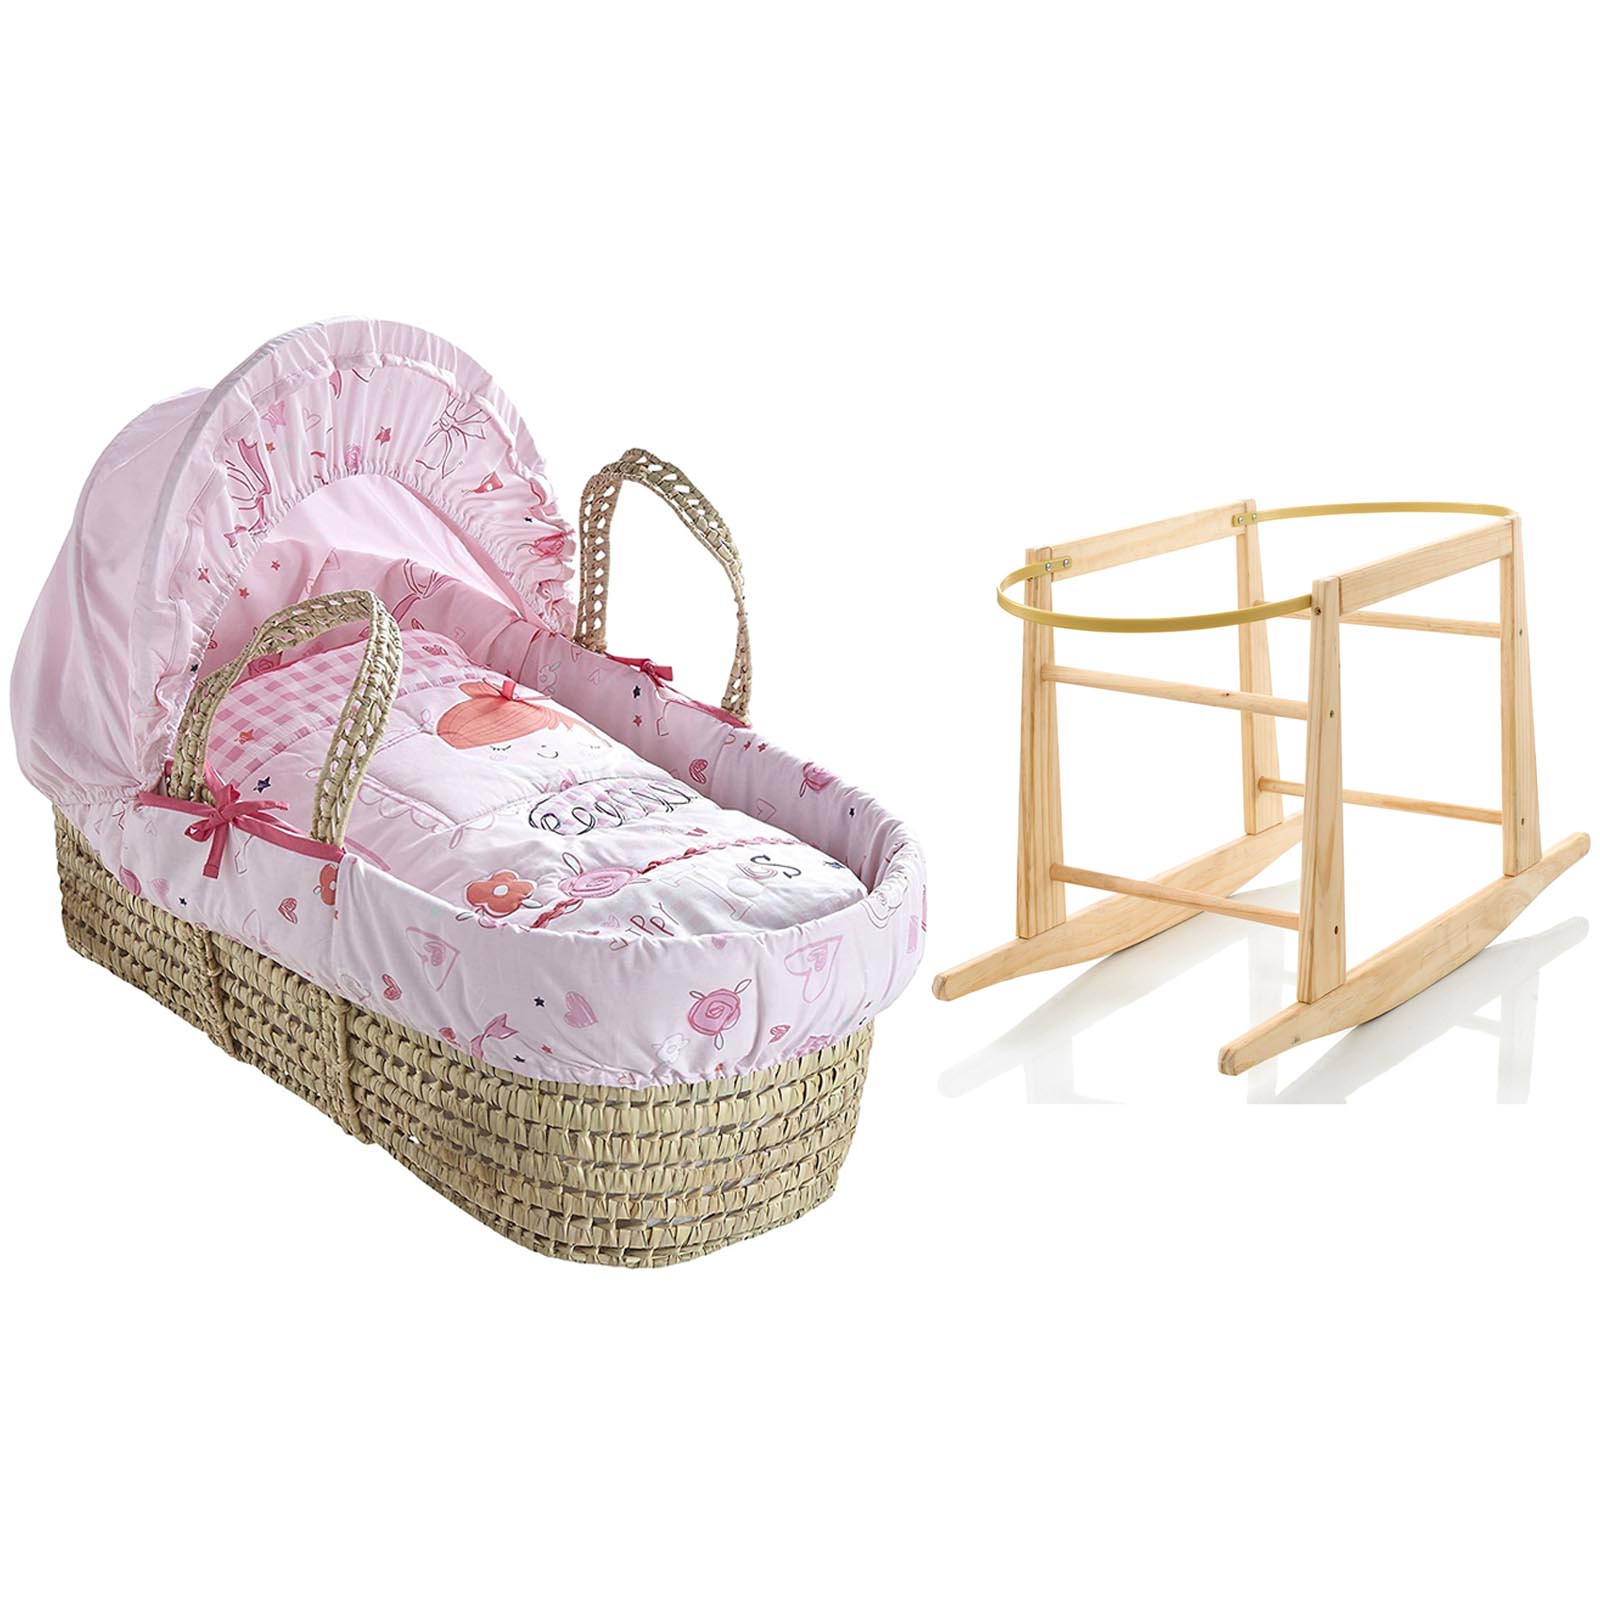 tippy toes moses basket